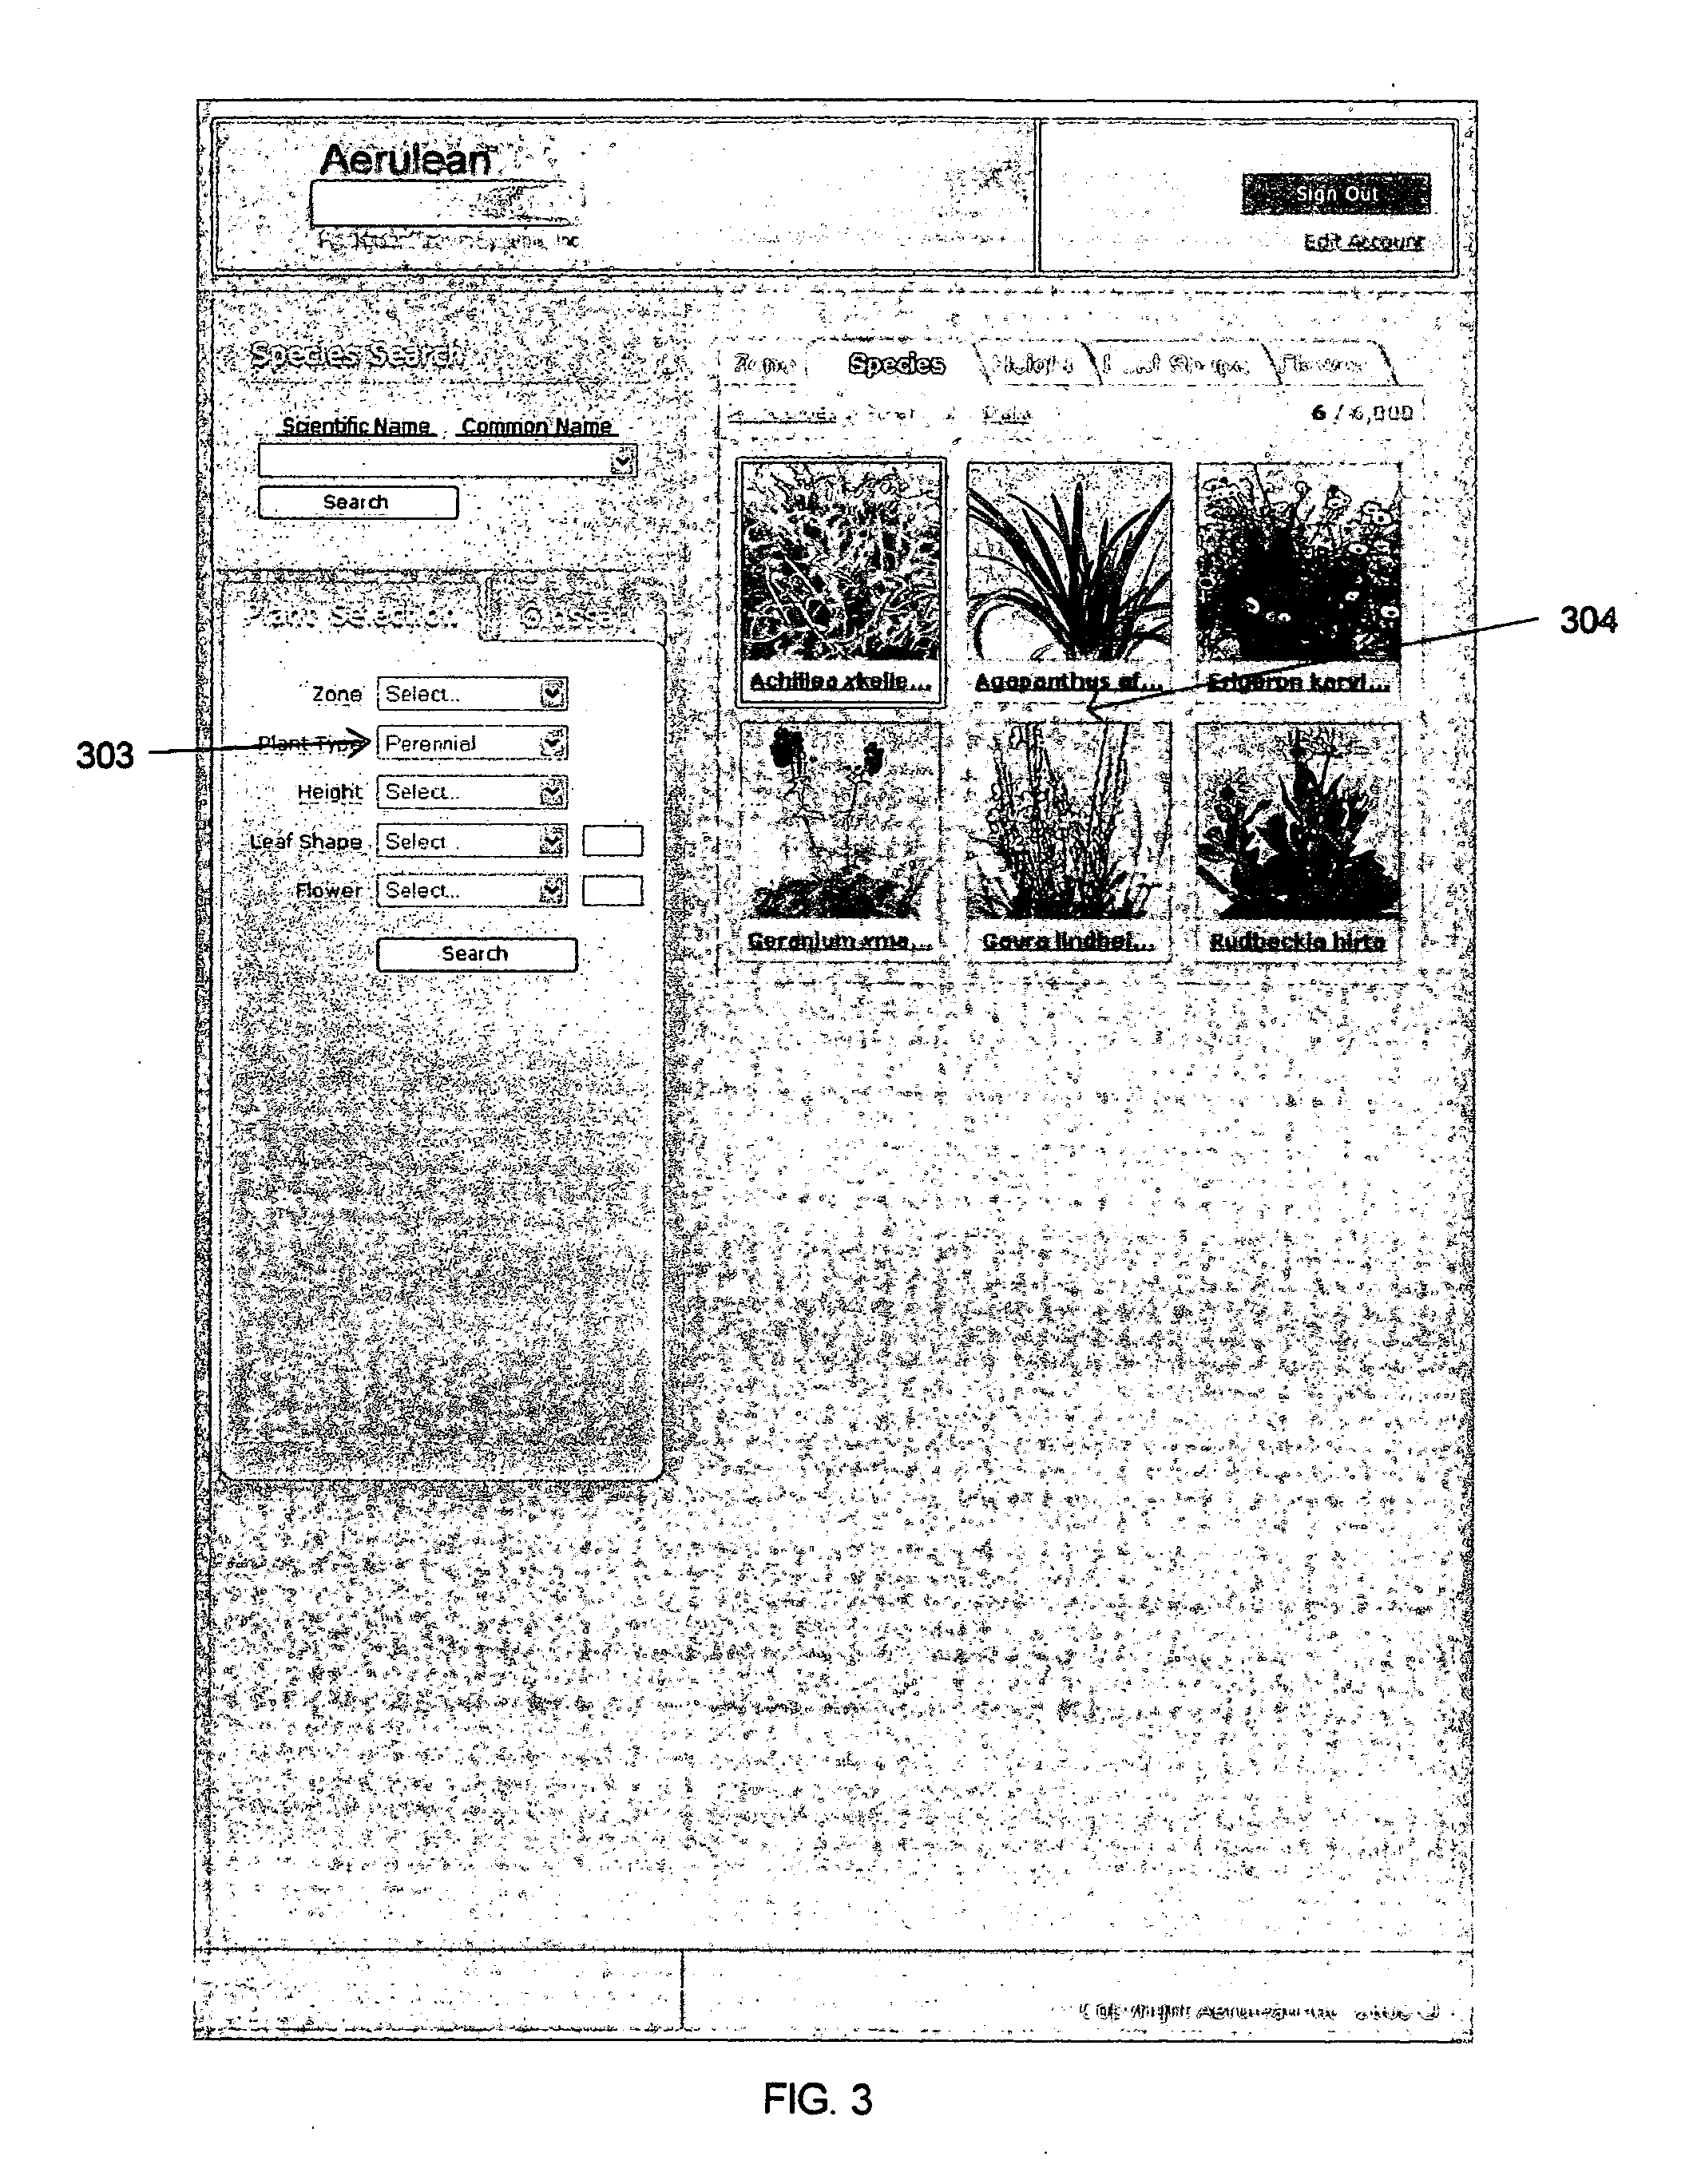 System and method for plant selection